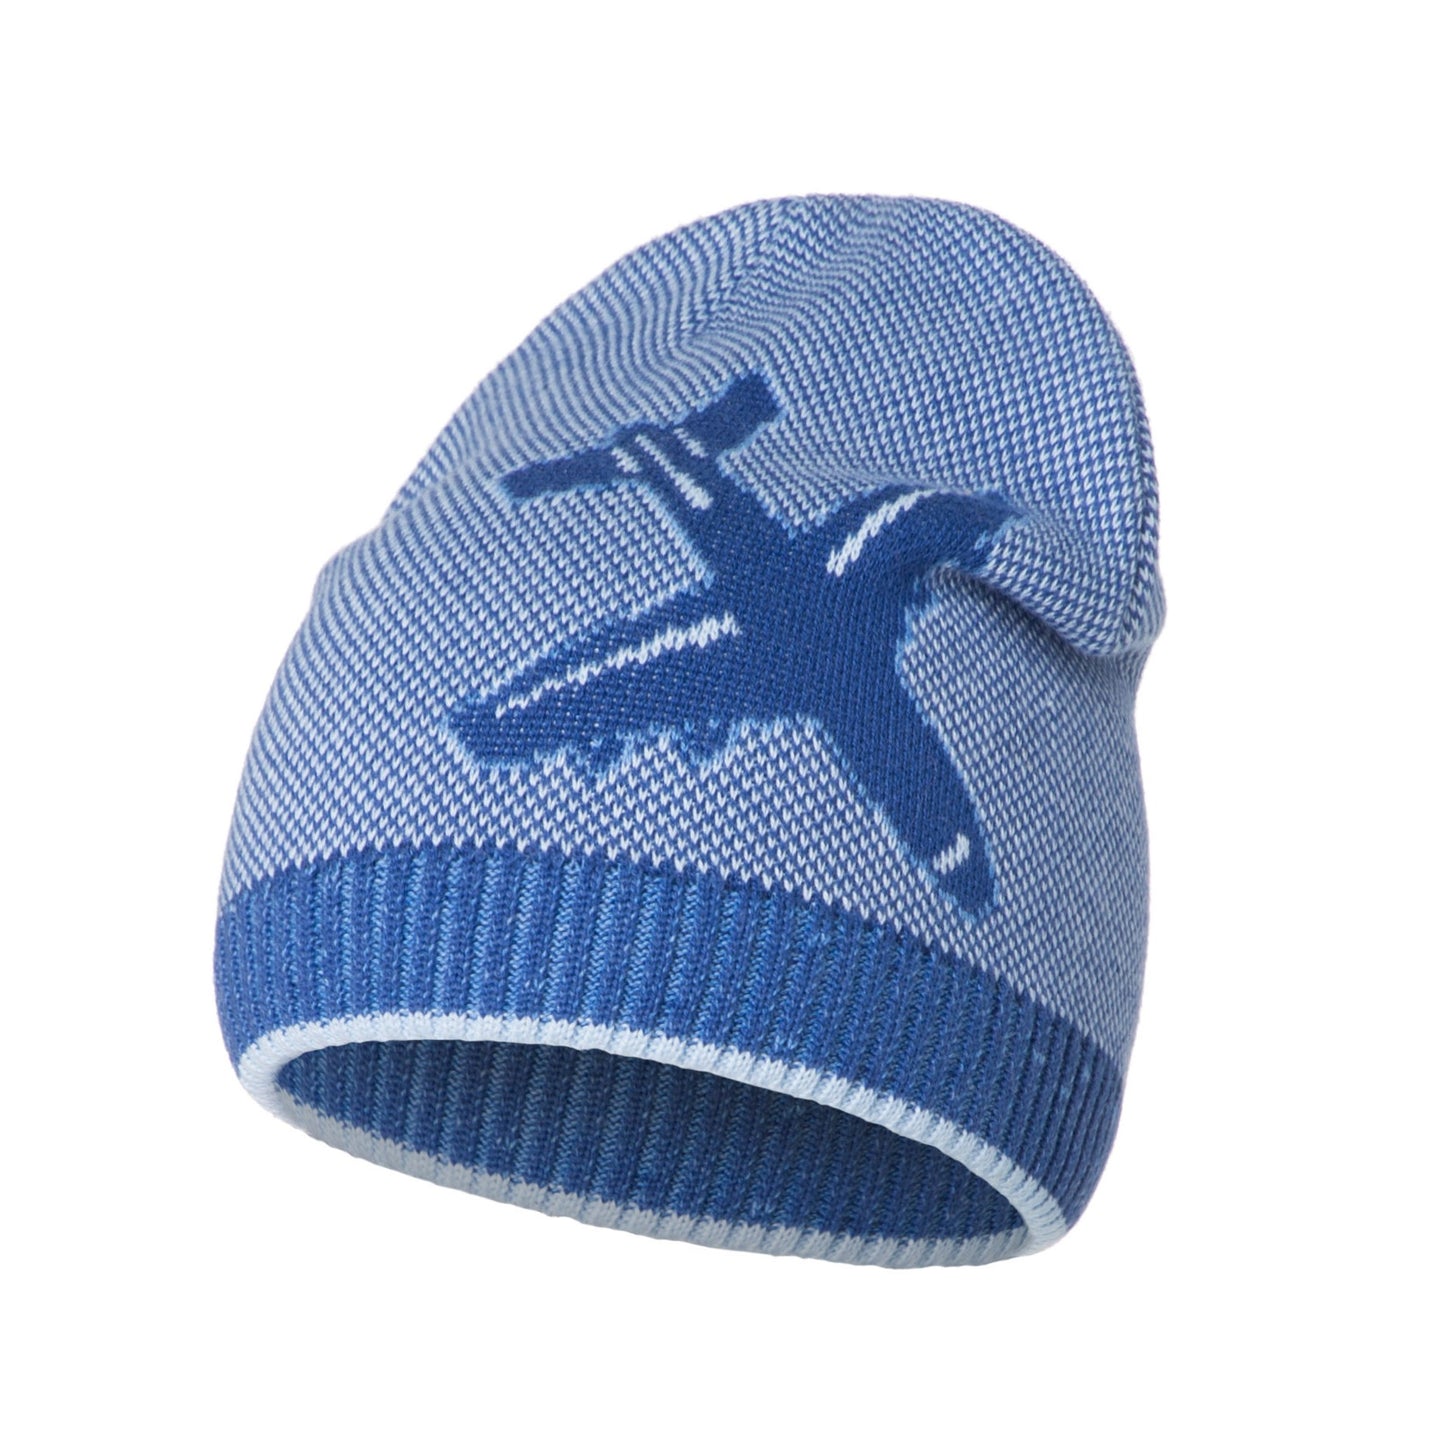 Conte/Esli Double knitted children's hats - For Boys (17С-116СП)